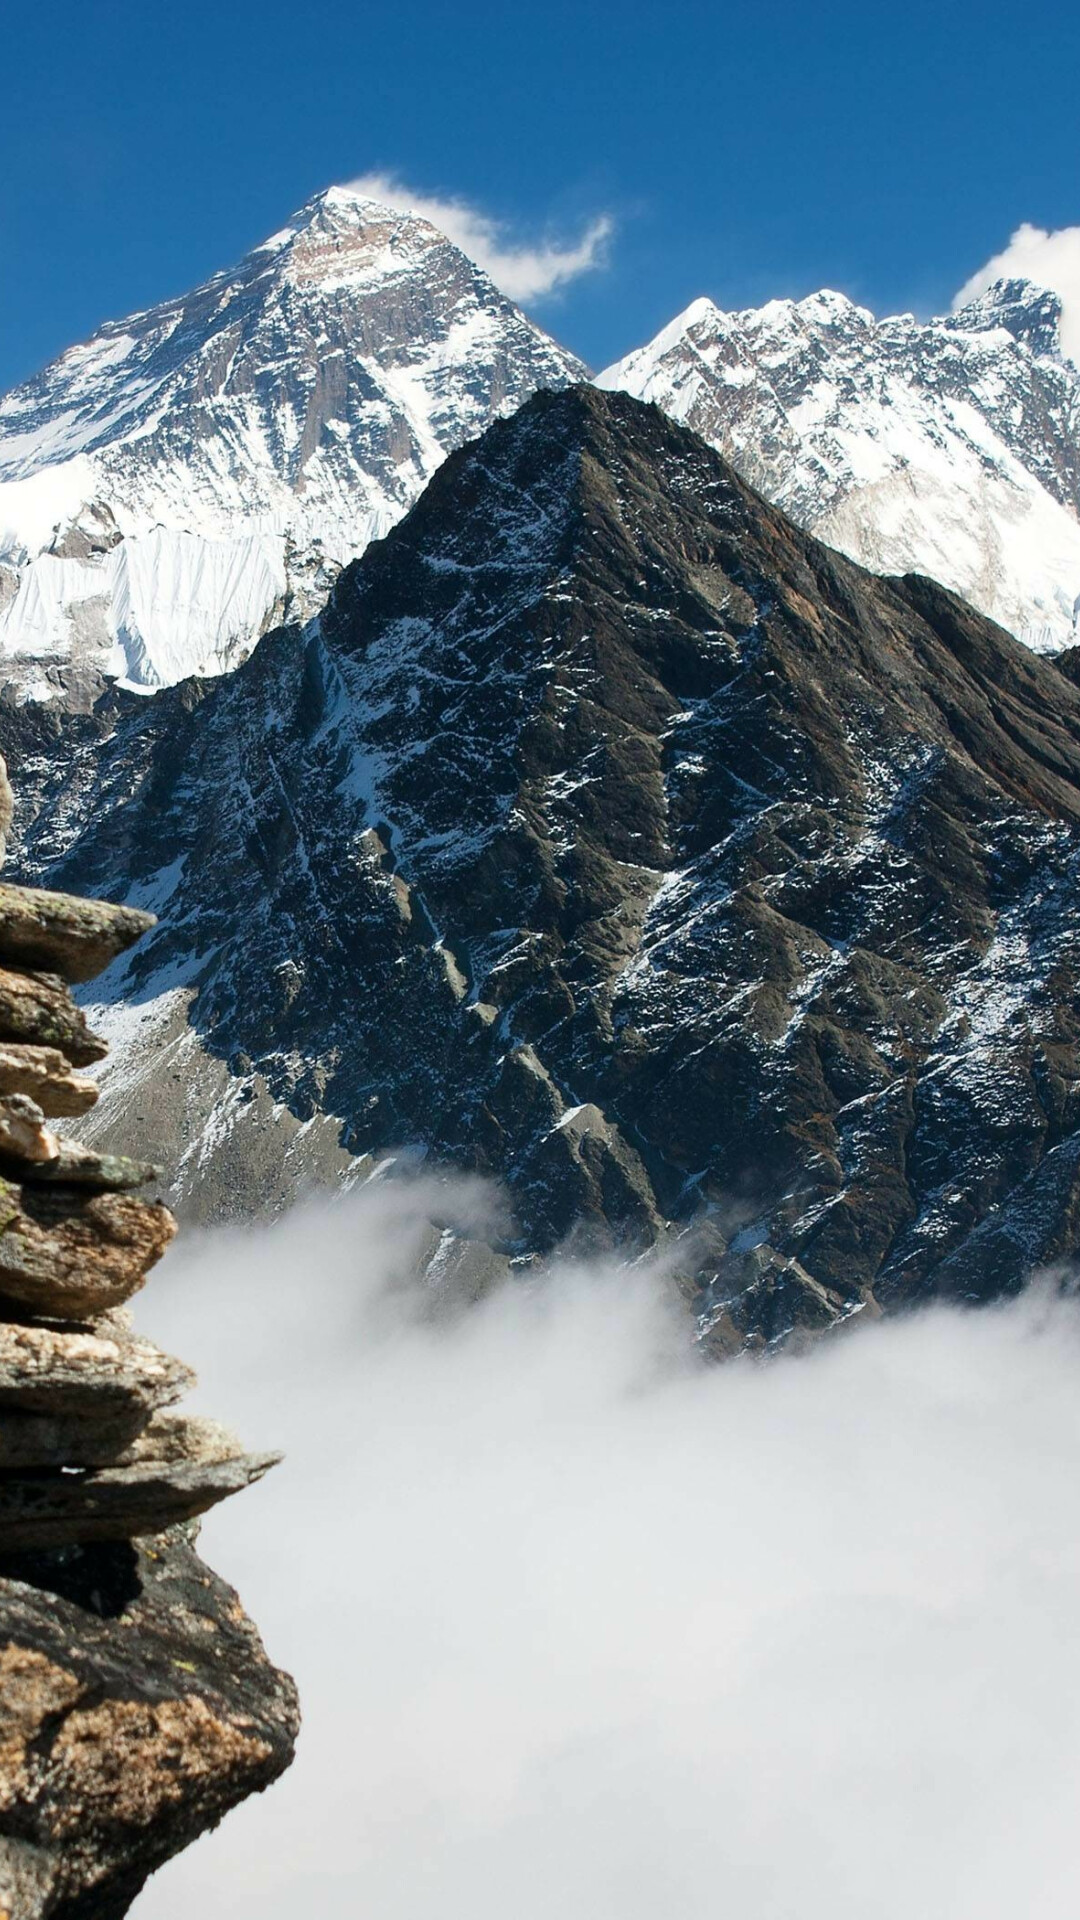 Mount Everest: The highest peak in the world, Located on the border of Tibet and Nepal. 1080x1920 Full HD Wallpaper.